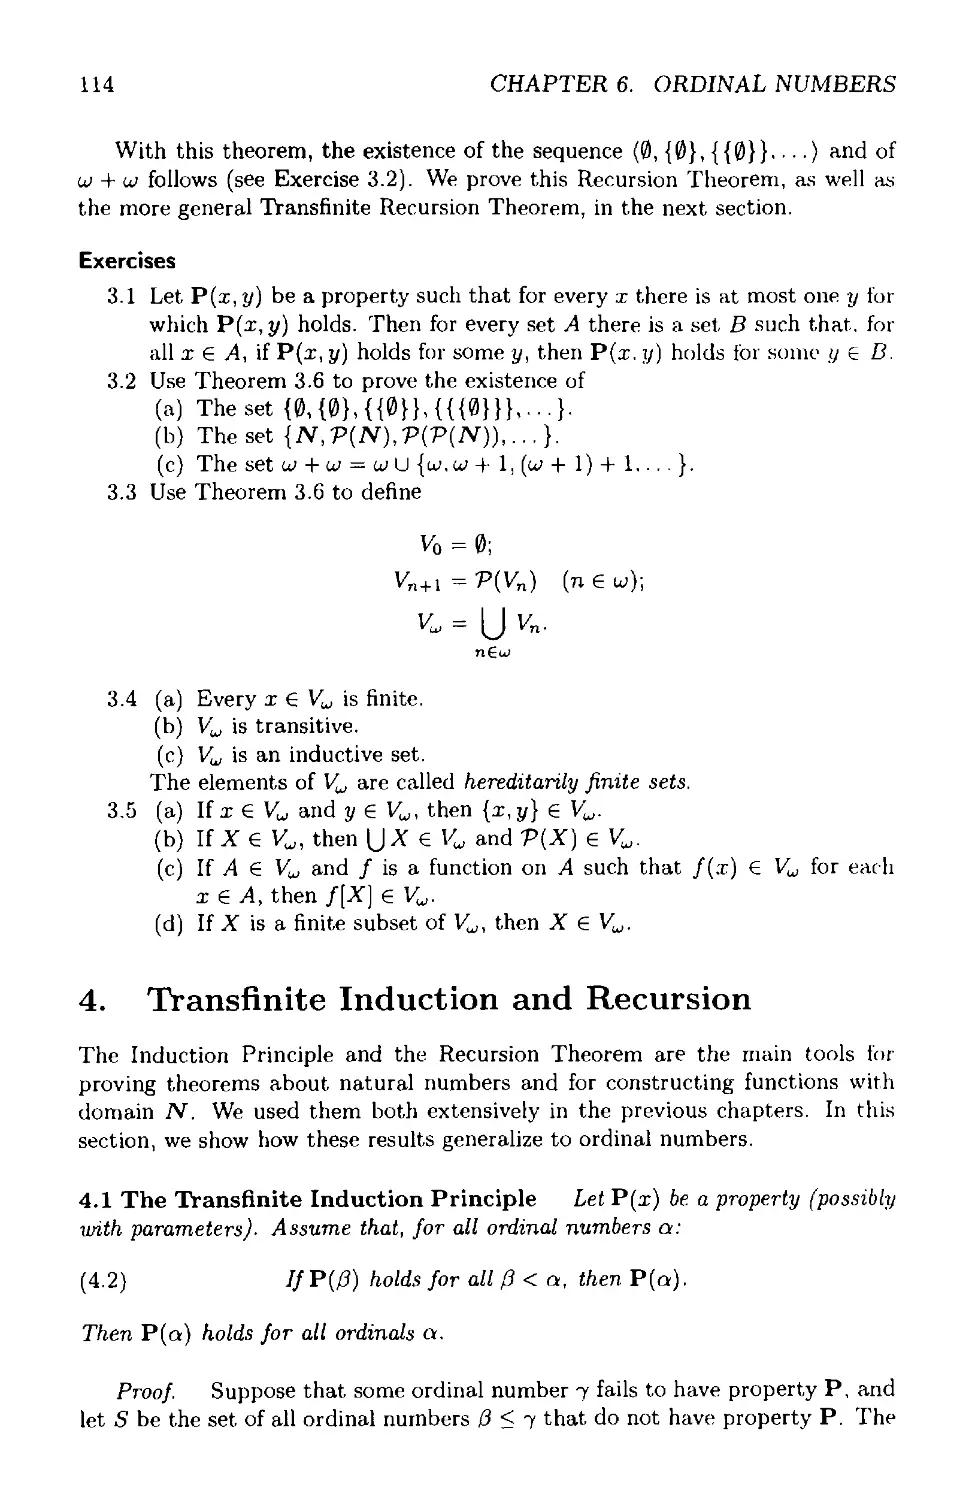 4 Transfinite Induction and Recursion